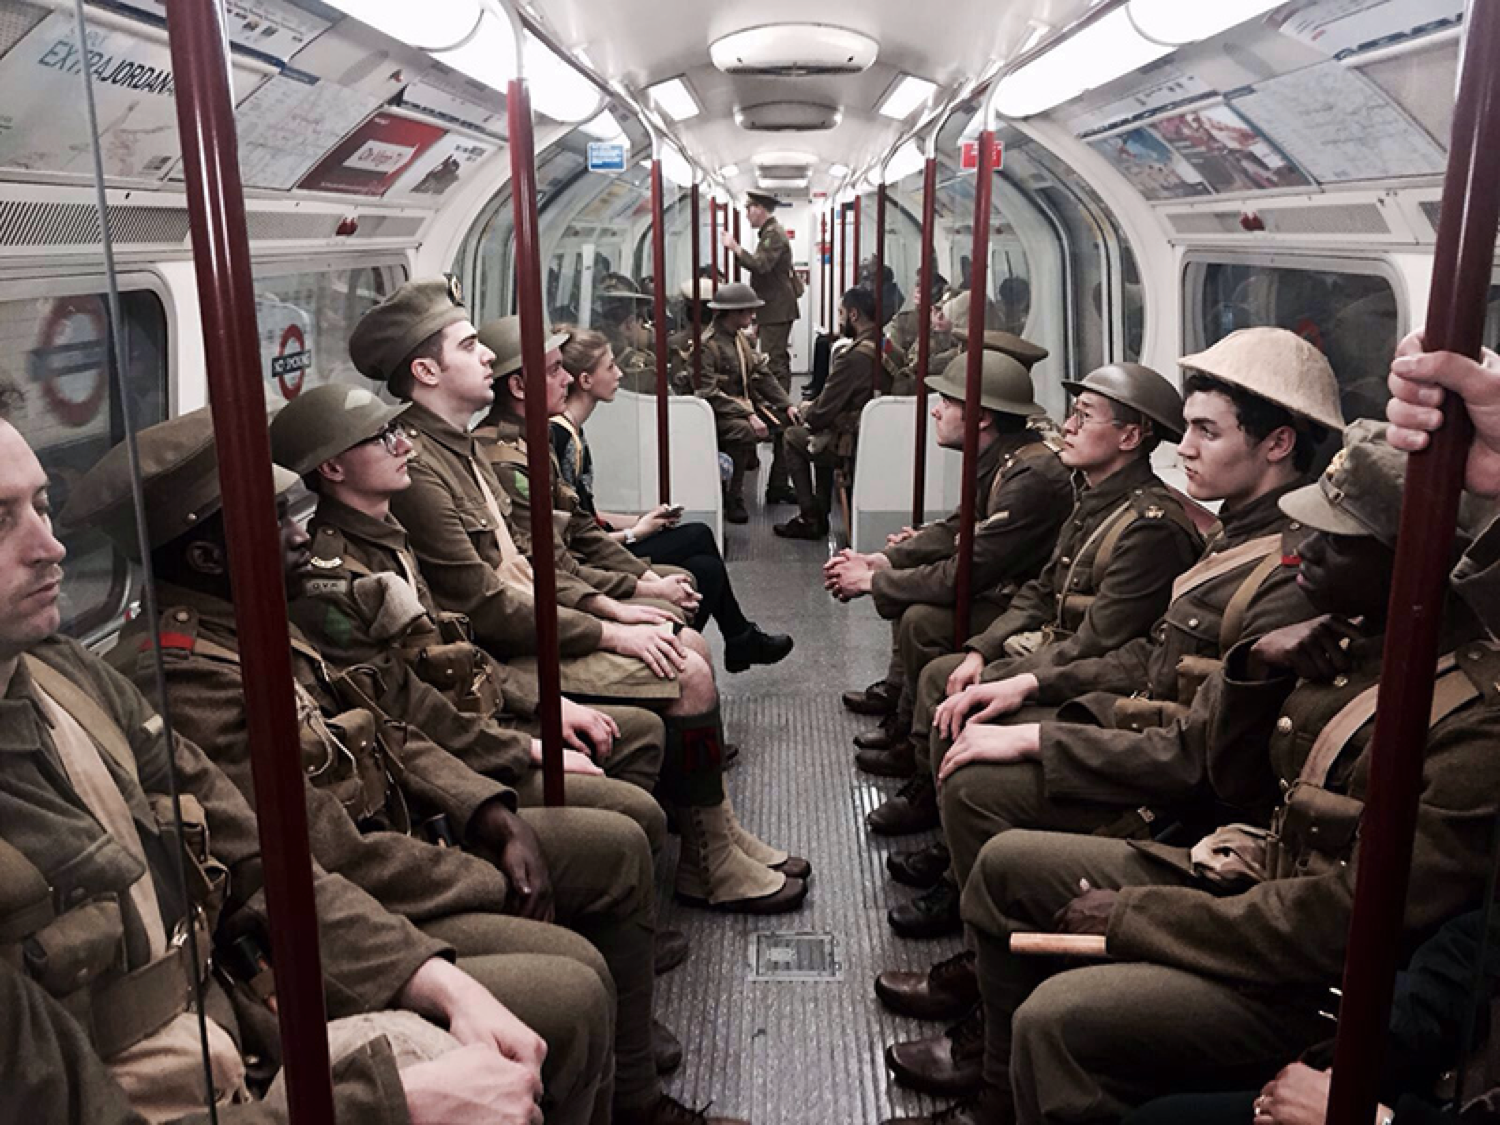 A group of men dressed as WWI soldiers sit on the London Underground in 2016.